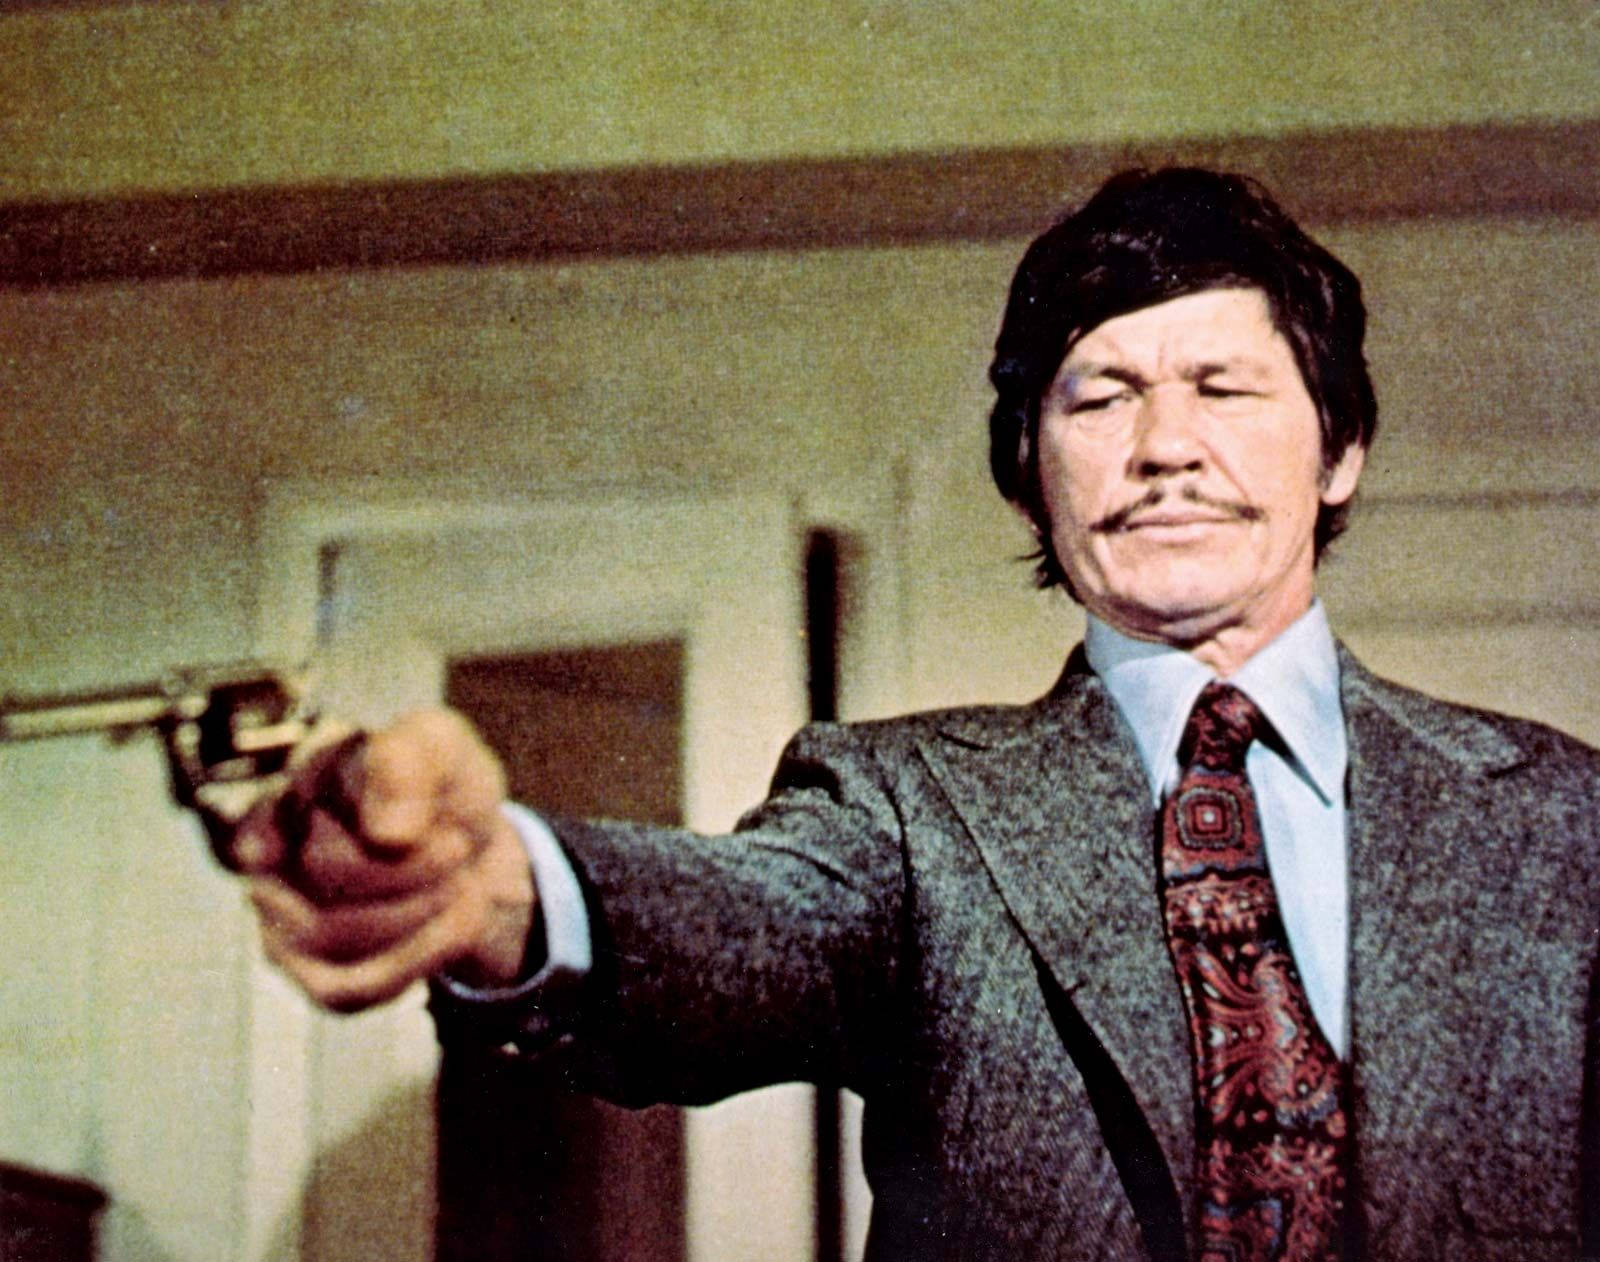 Charles Bronson In The Death Wish 1974 Movie Wallpaper